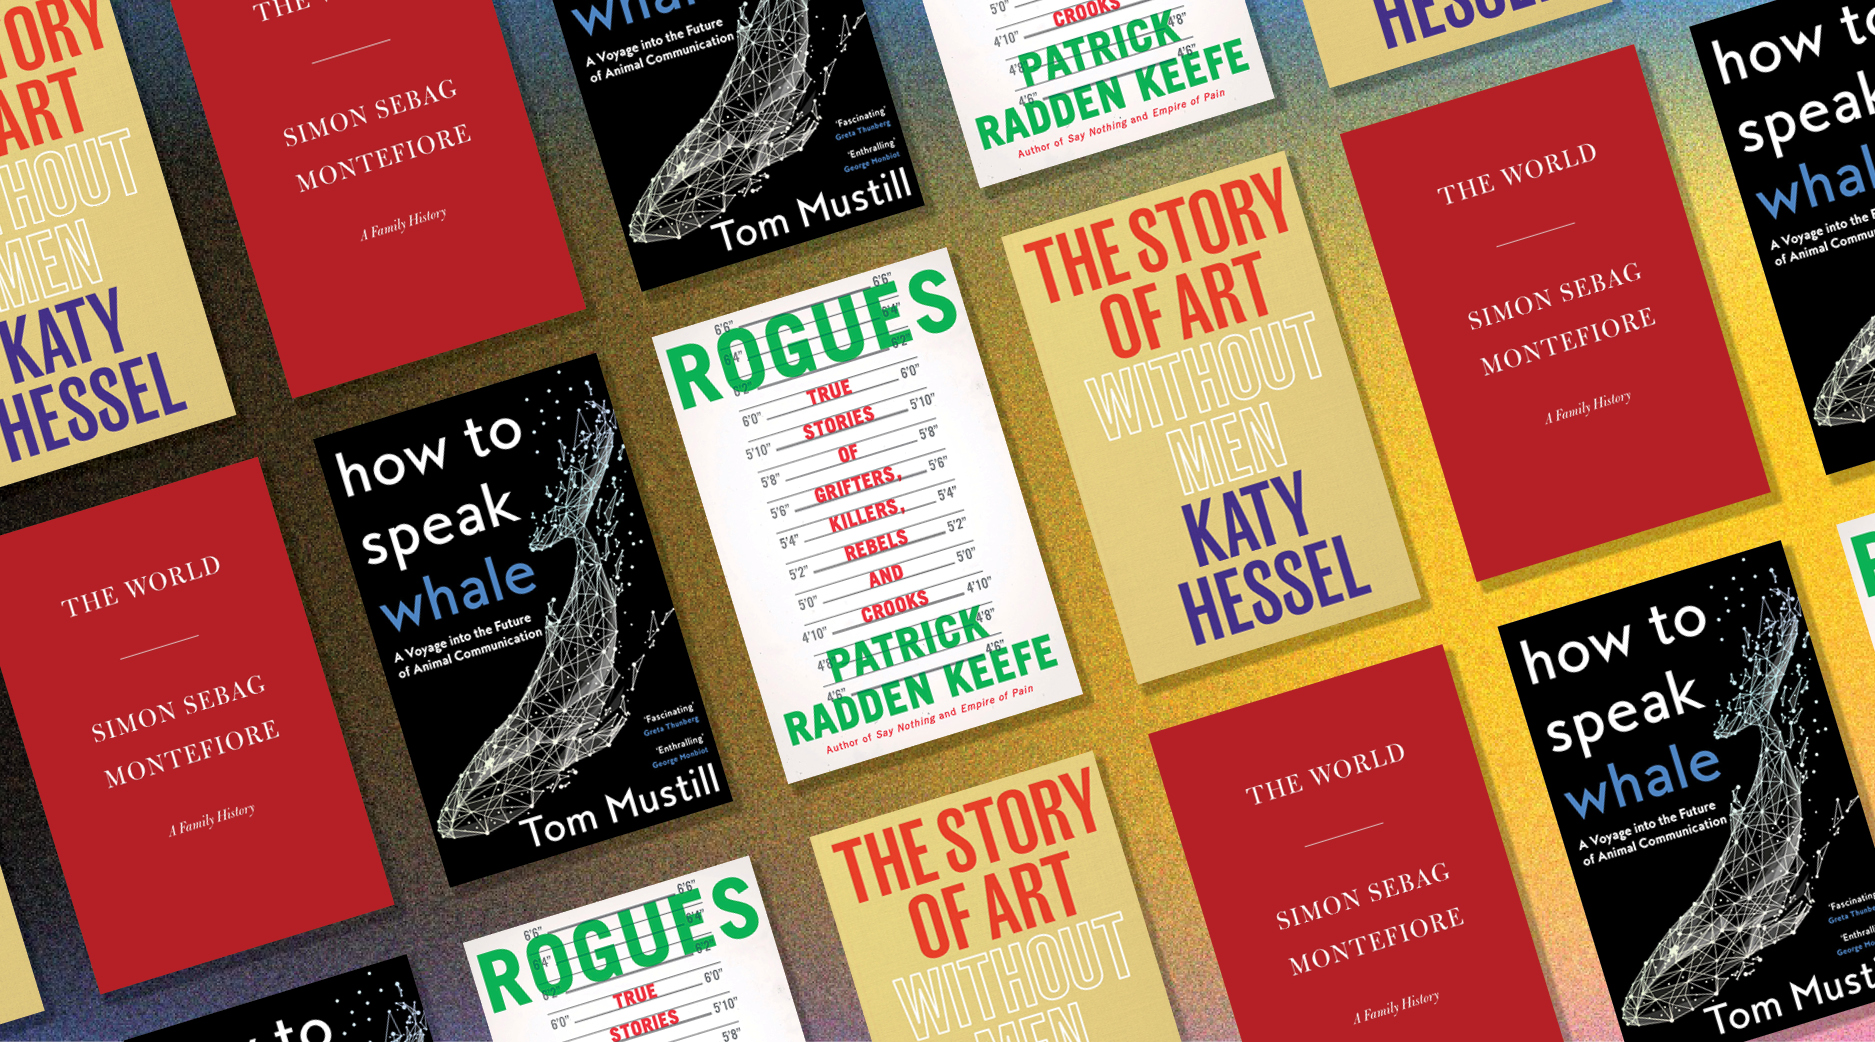 Expand your mind with 4 fascinating new nonfiction books you need to